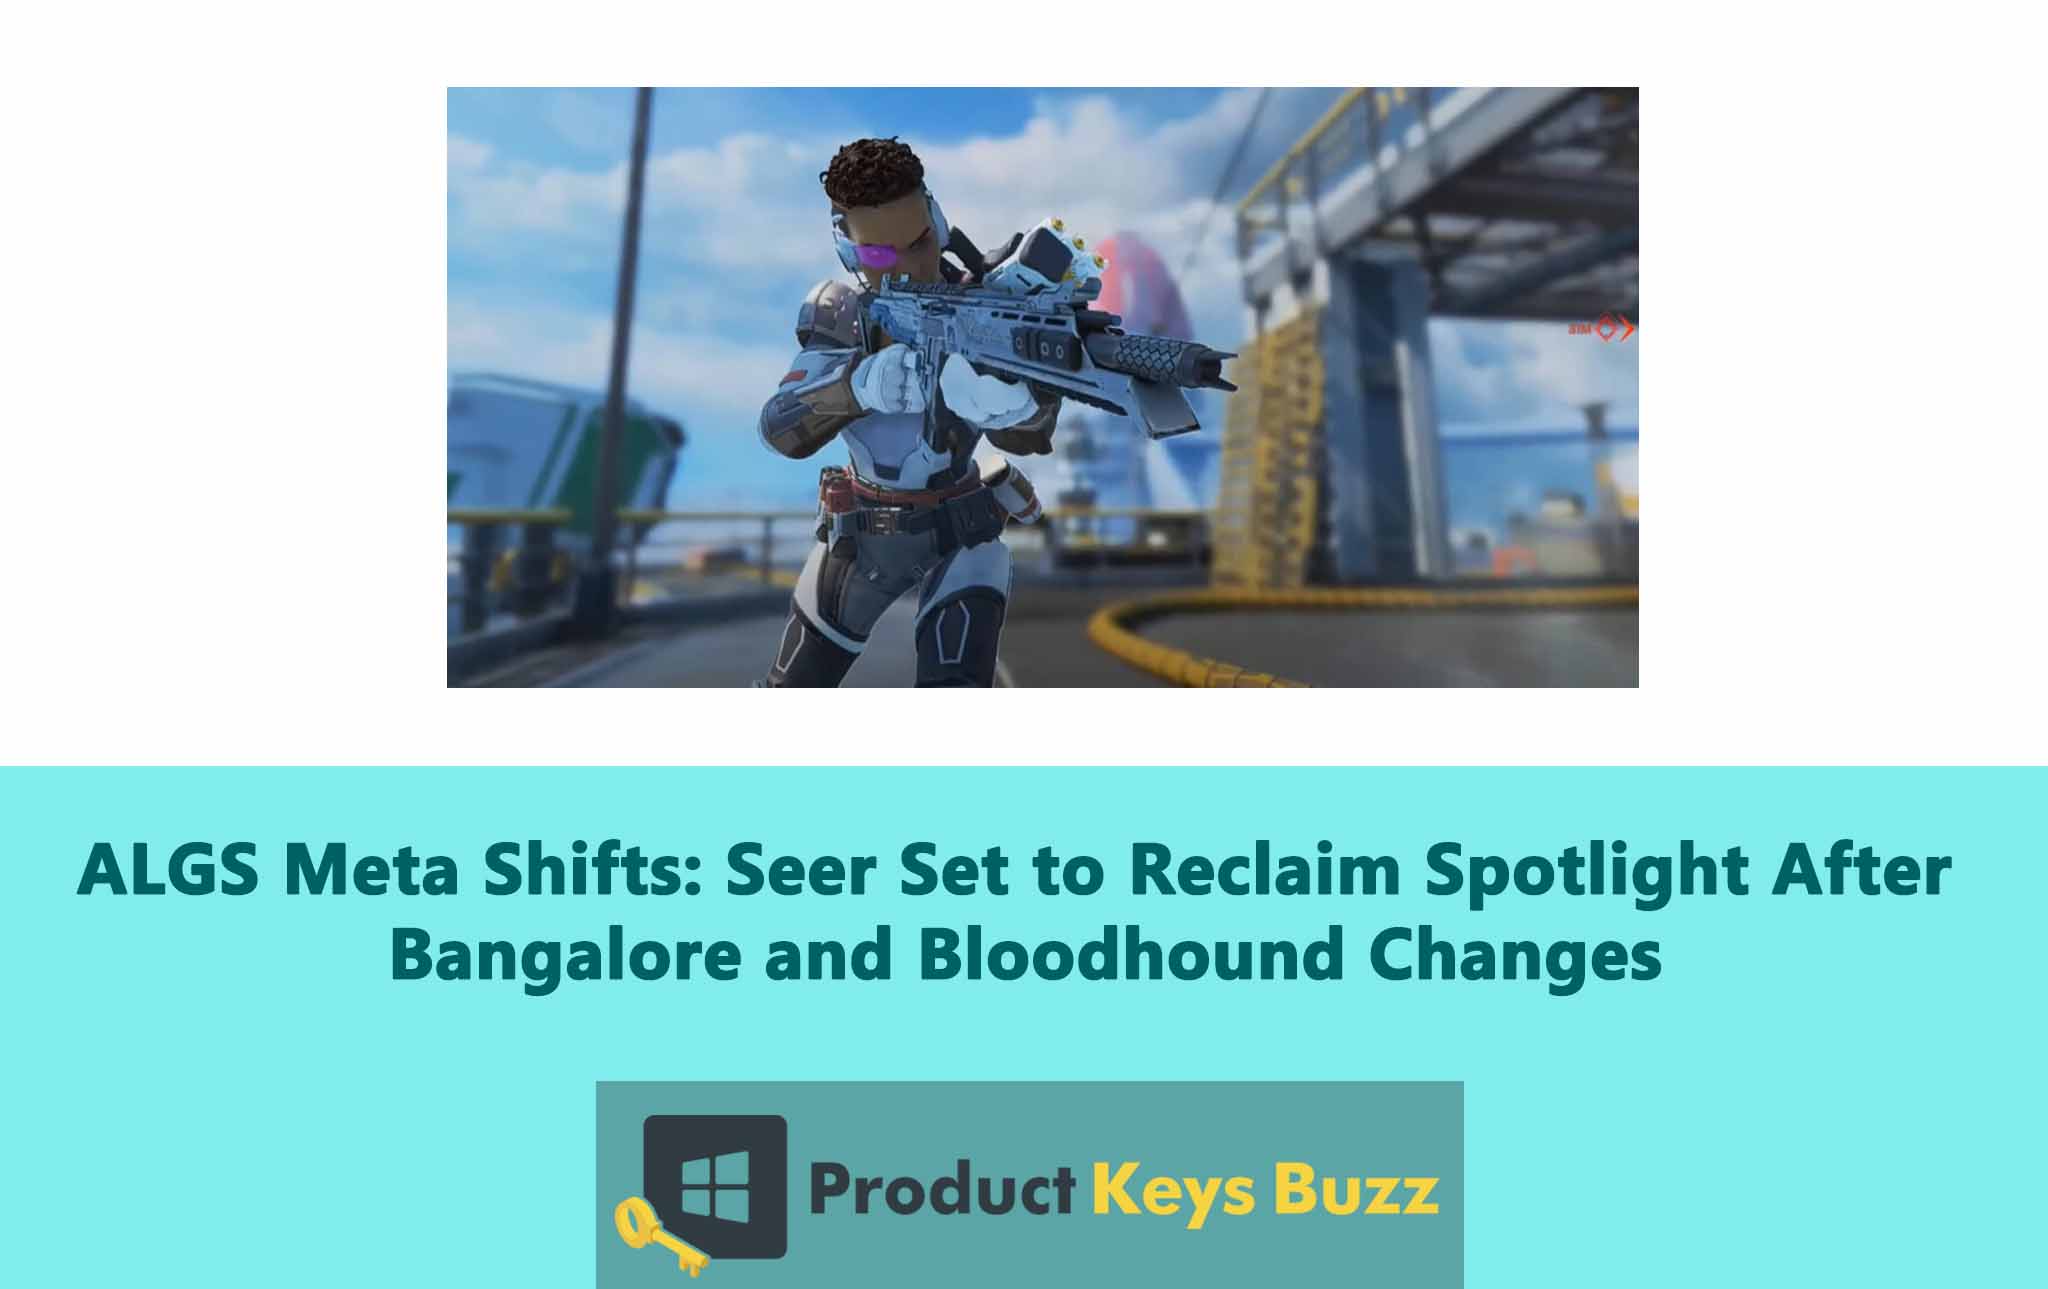 Seer Set to Reclaim Spotlight After Bangalore and Bloodhound Changes